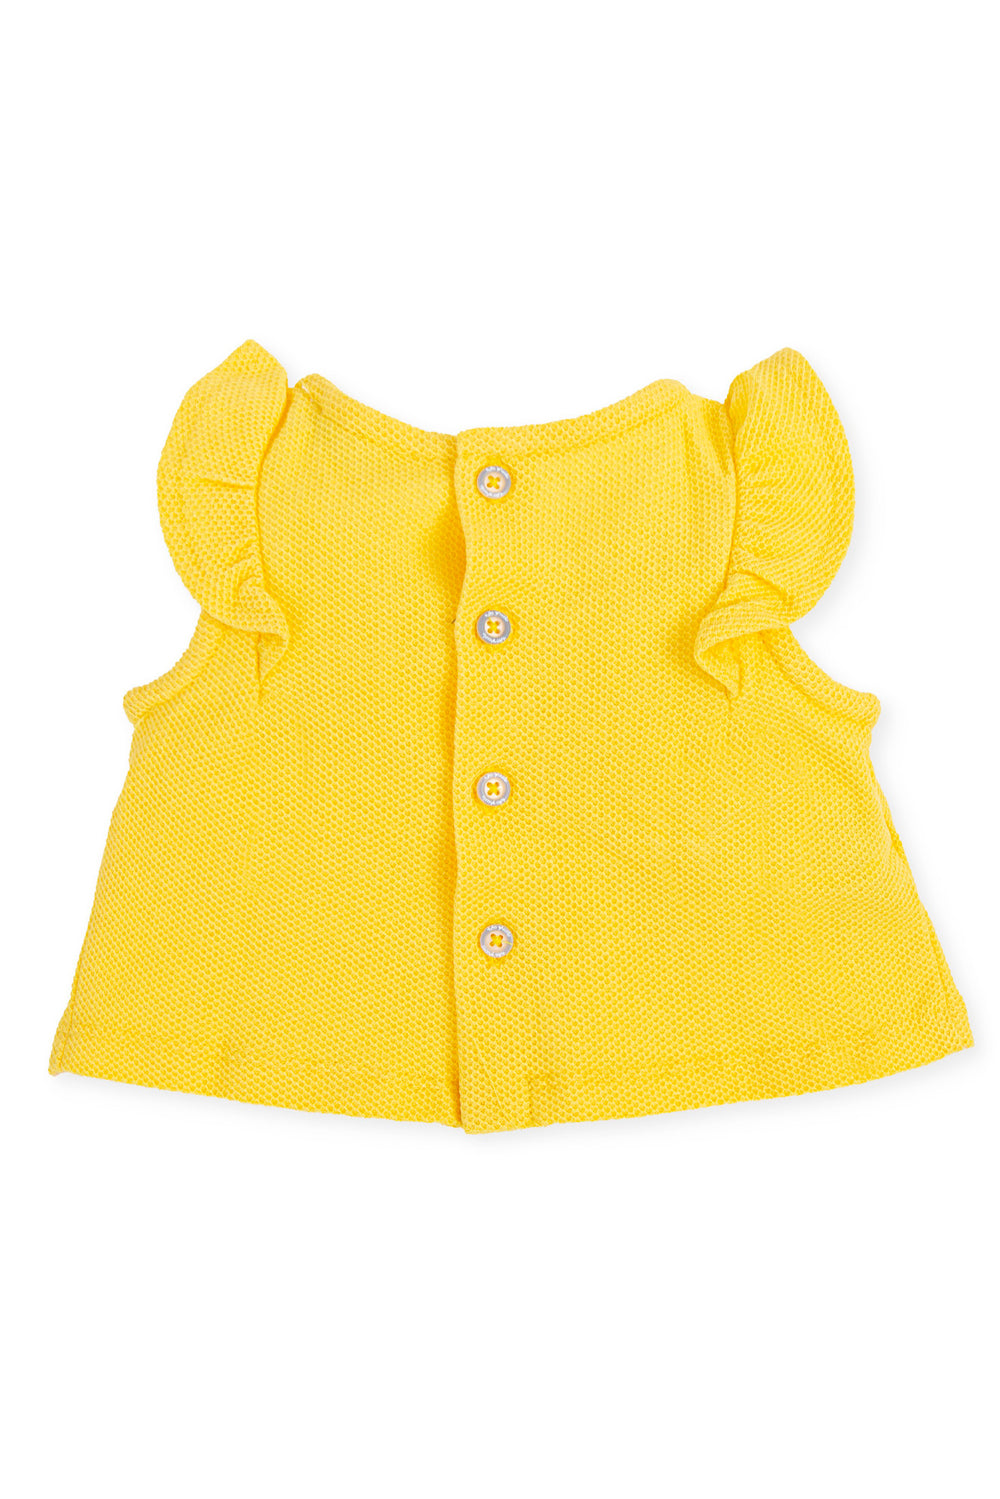 Tutto Piccolo "Pamela" Yellow Top & Striped Bloomers | Millie and John